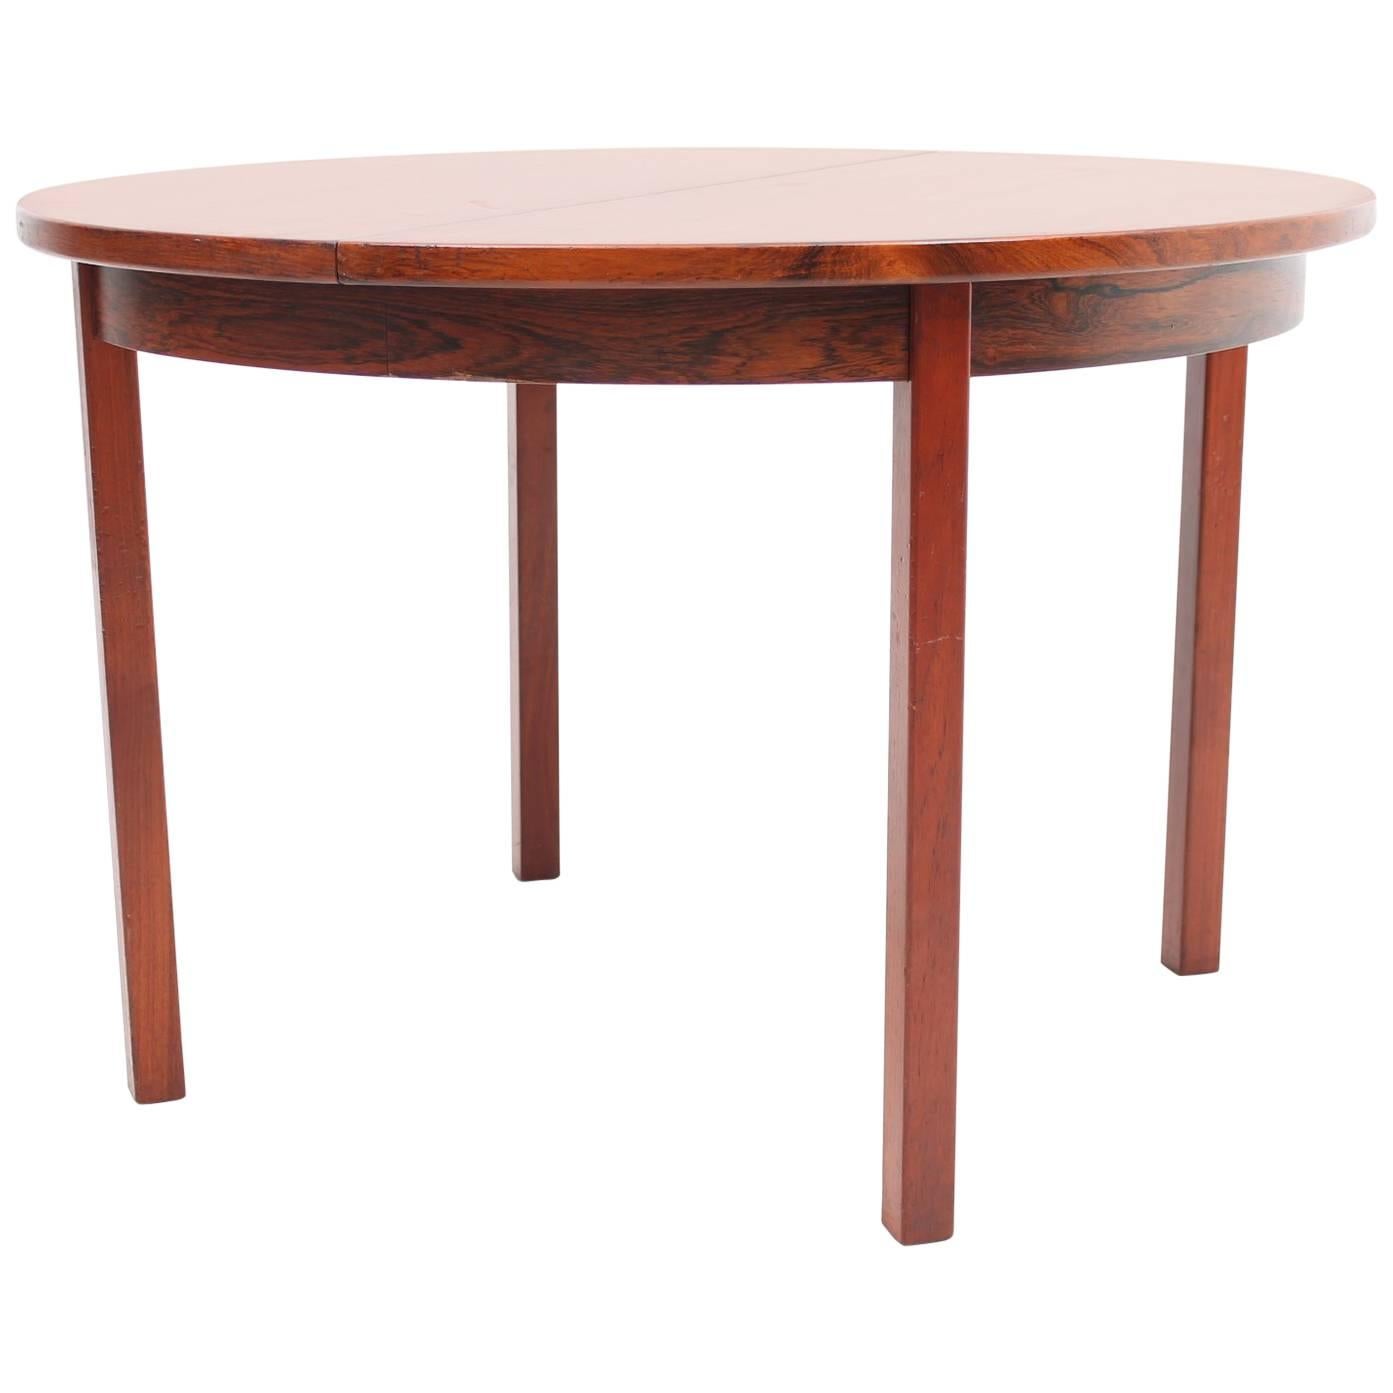 Circular Rosewood Dining Table with Self Storing Leaves, Scandinavian Modern For Sale